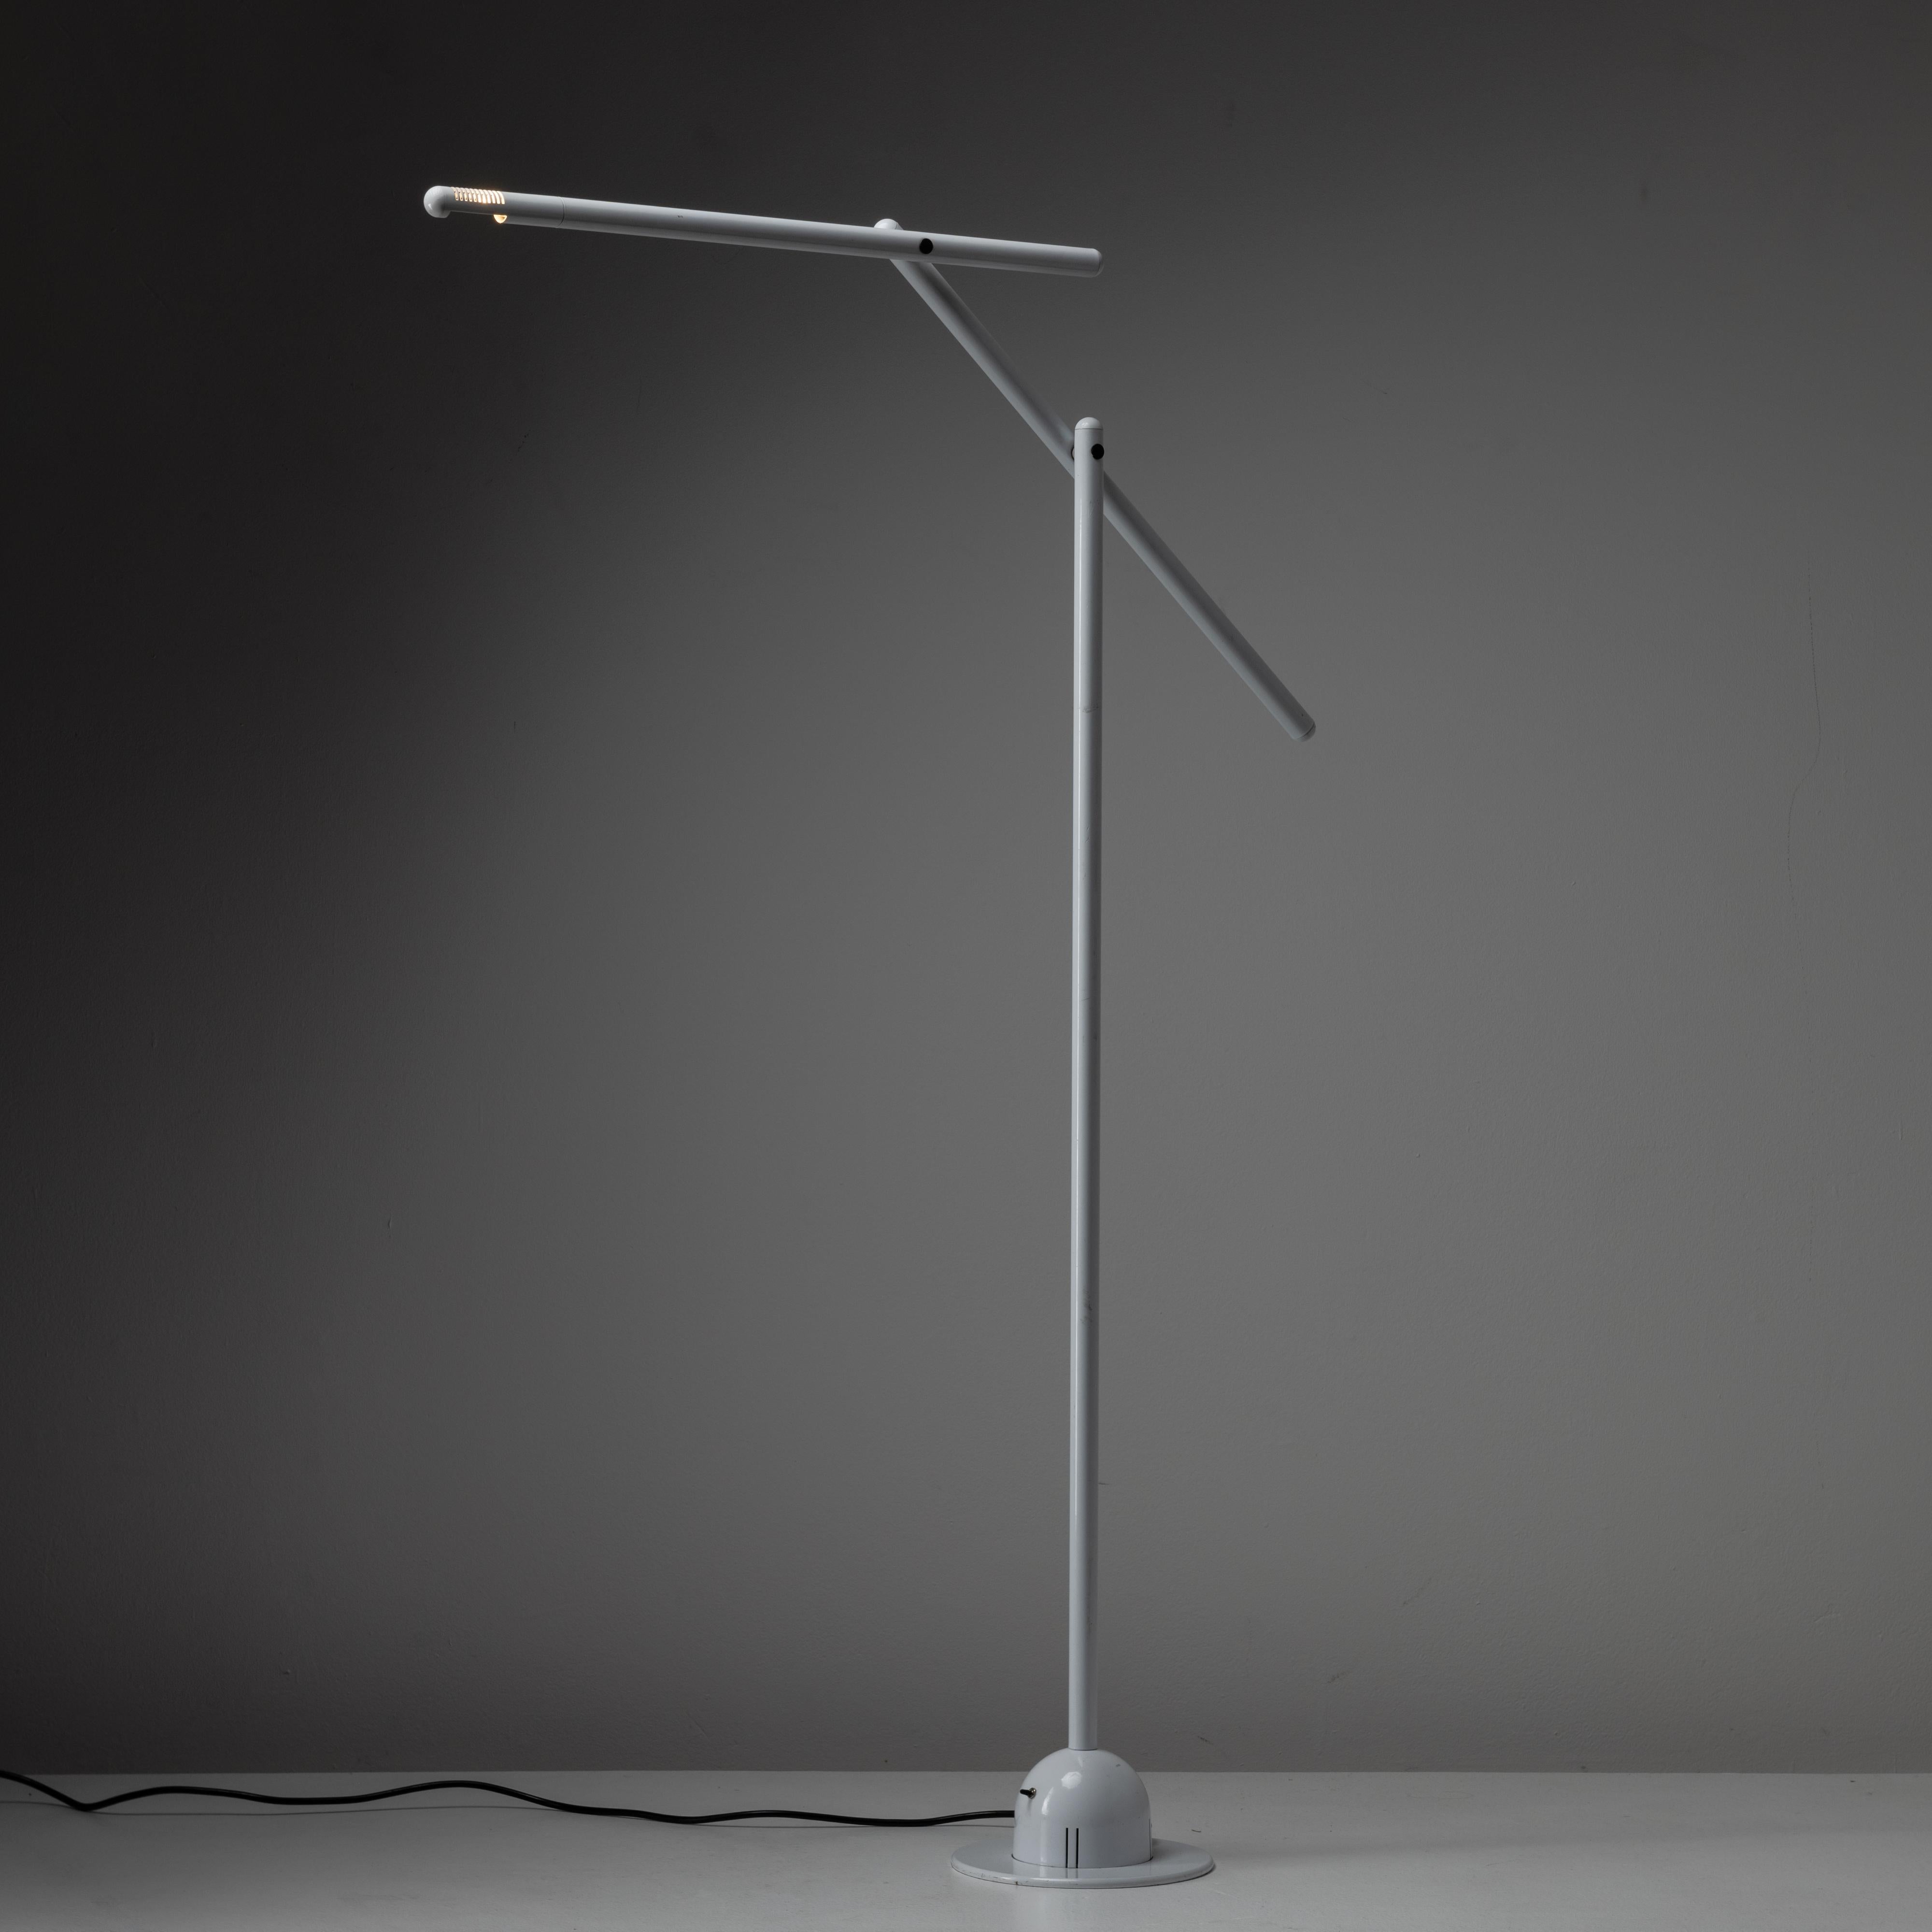 'Mira' Floor Lamp by Mario Arnaboldi for Programmaluce Italy. Designed and manufactured in Italy, in 1983. Mechanical post modern tube floor lamp. Each tube section can be maneuvered to different positions allowing for a vast number of positions.